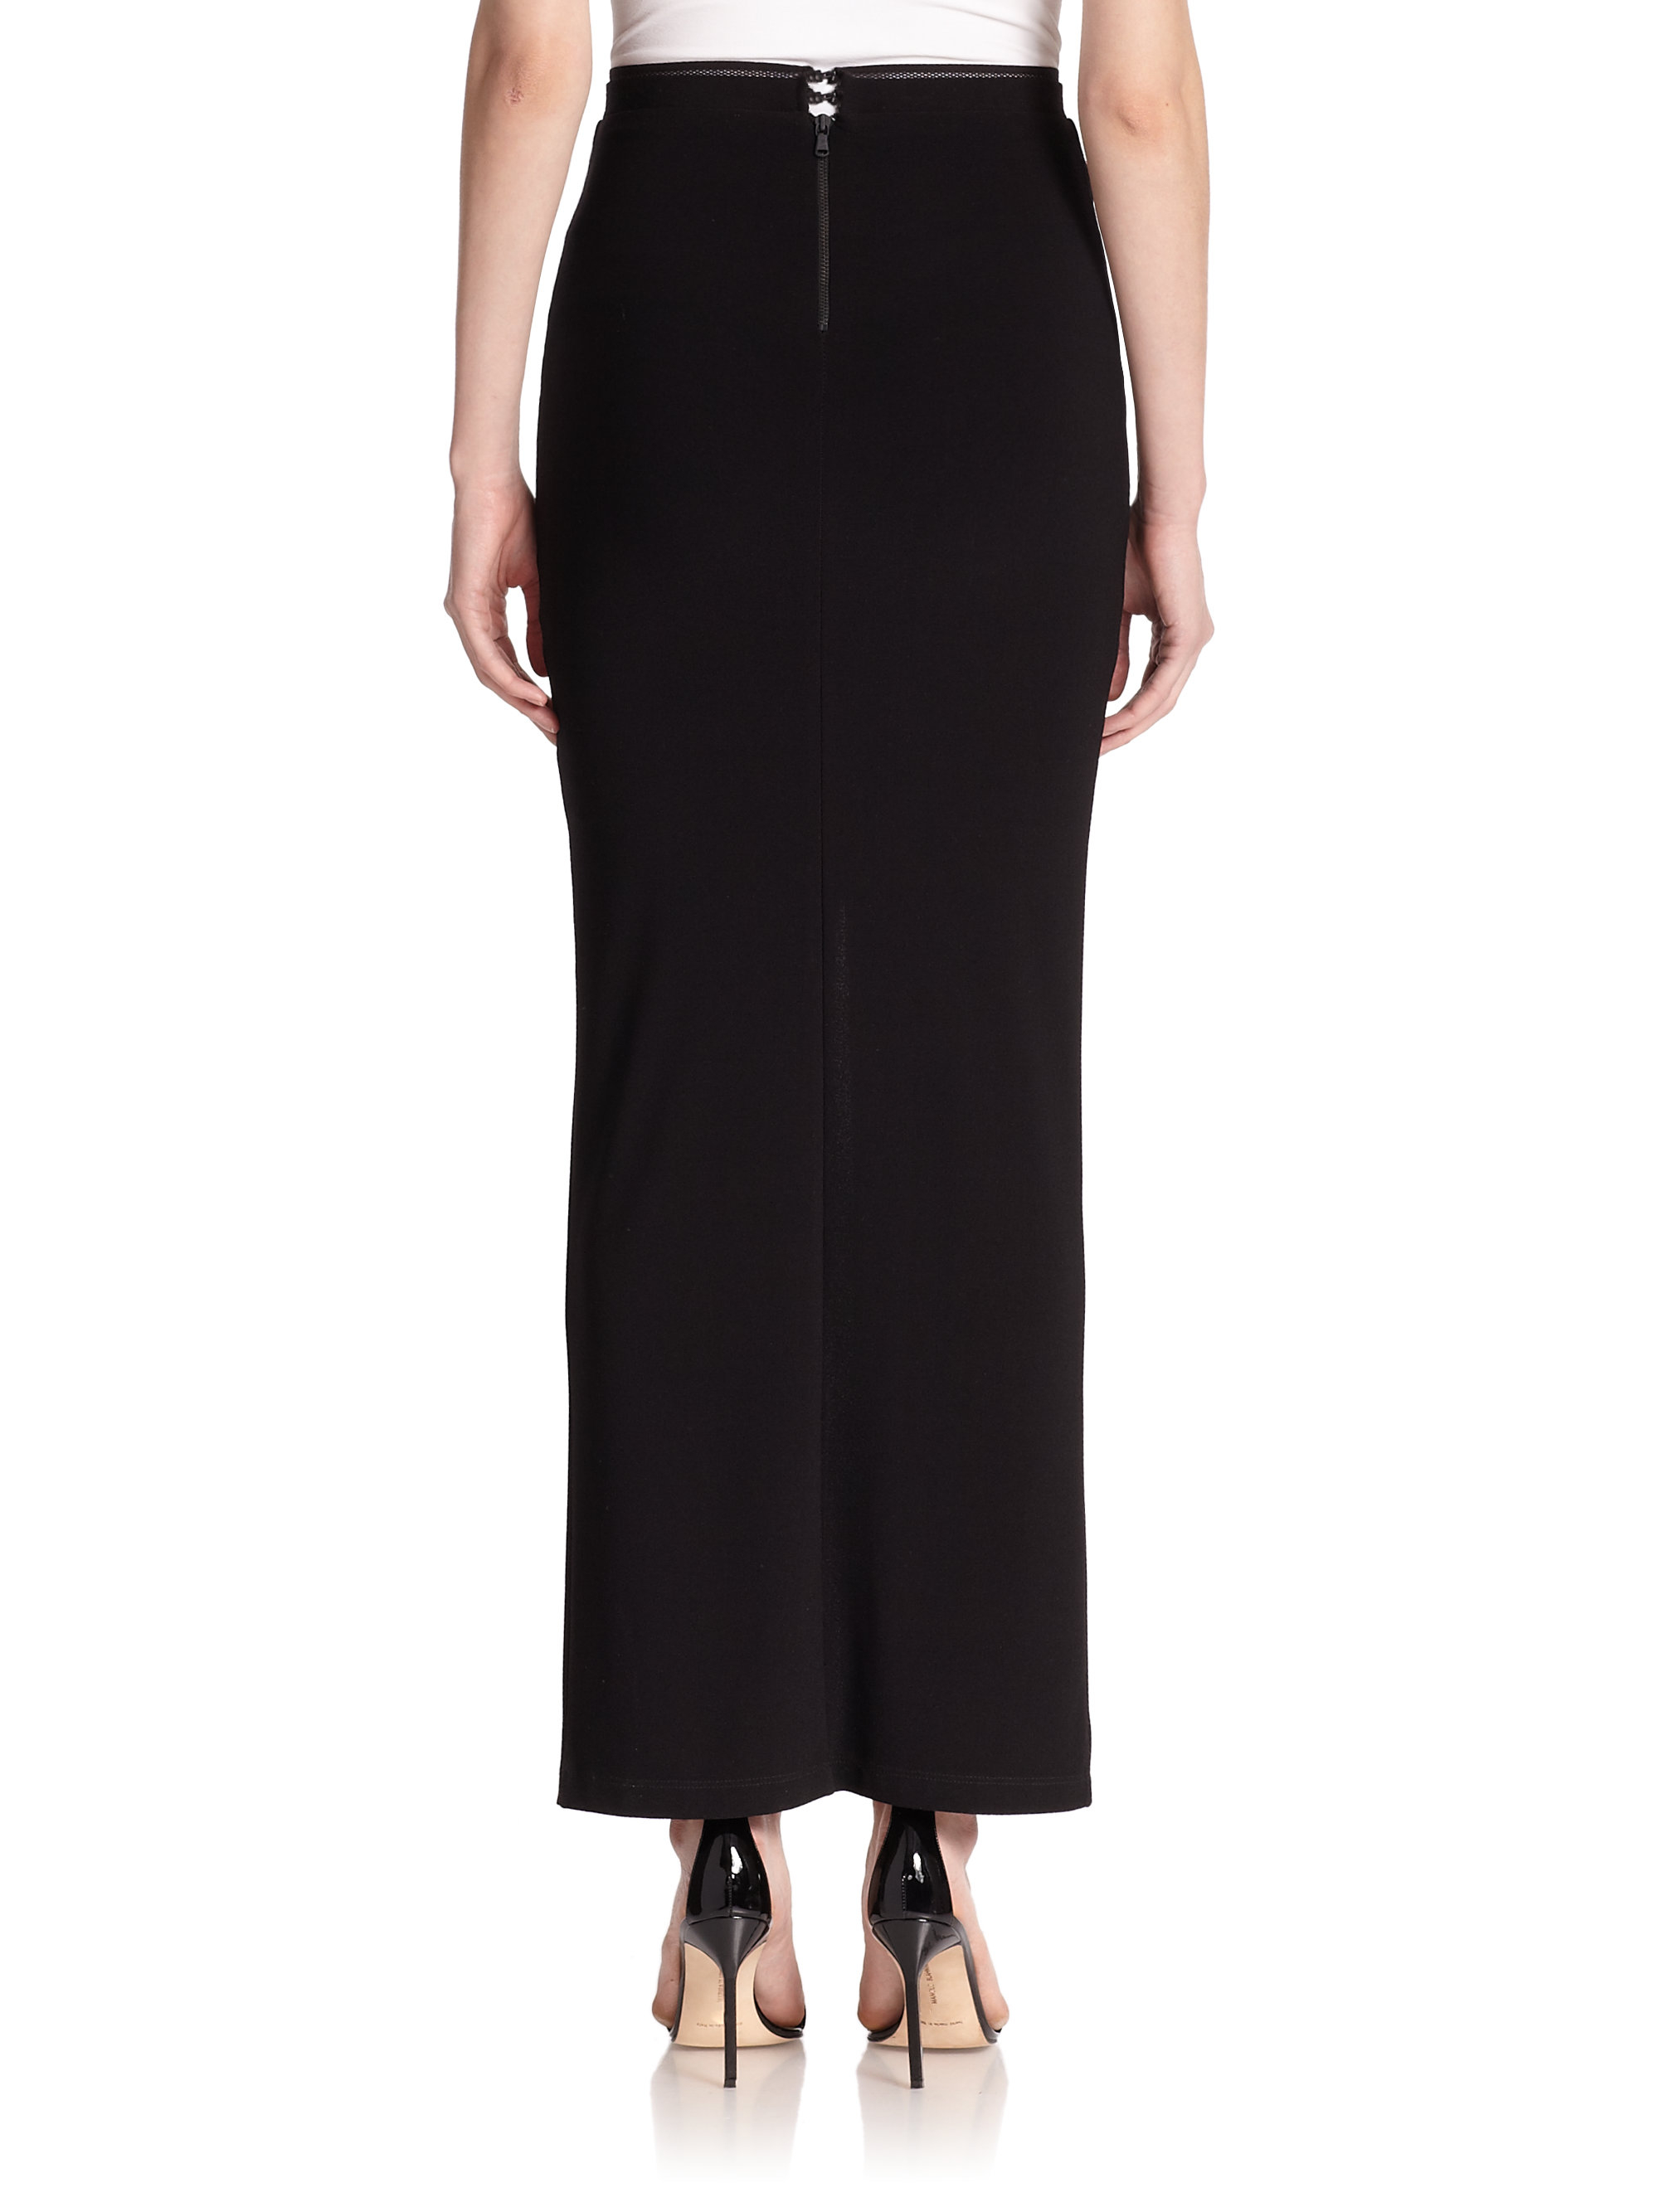 Alice + Olivia Double-slit Stretch Jersey Maxi Skirt in Black - Lyst